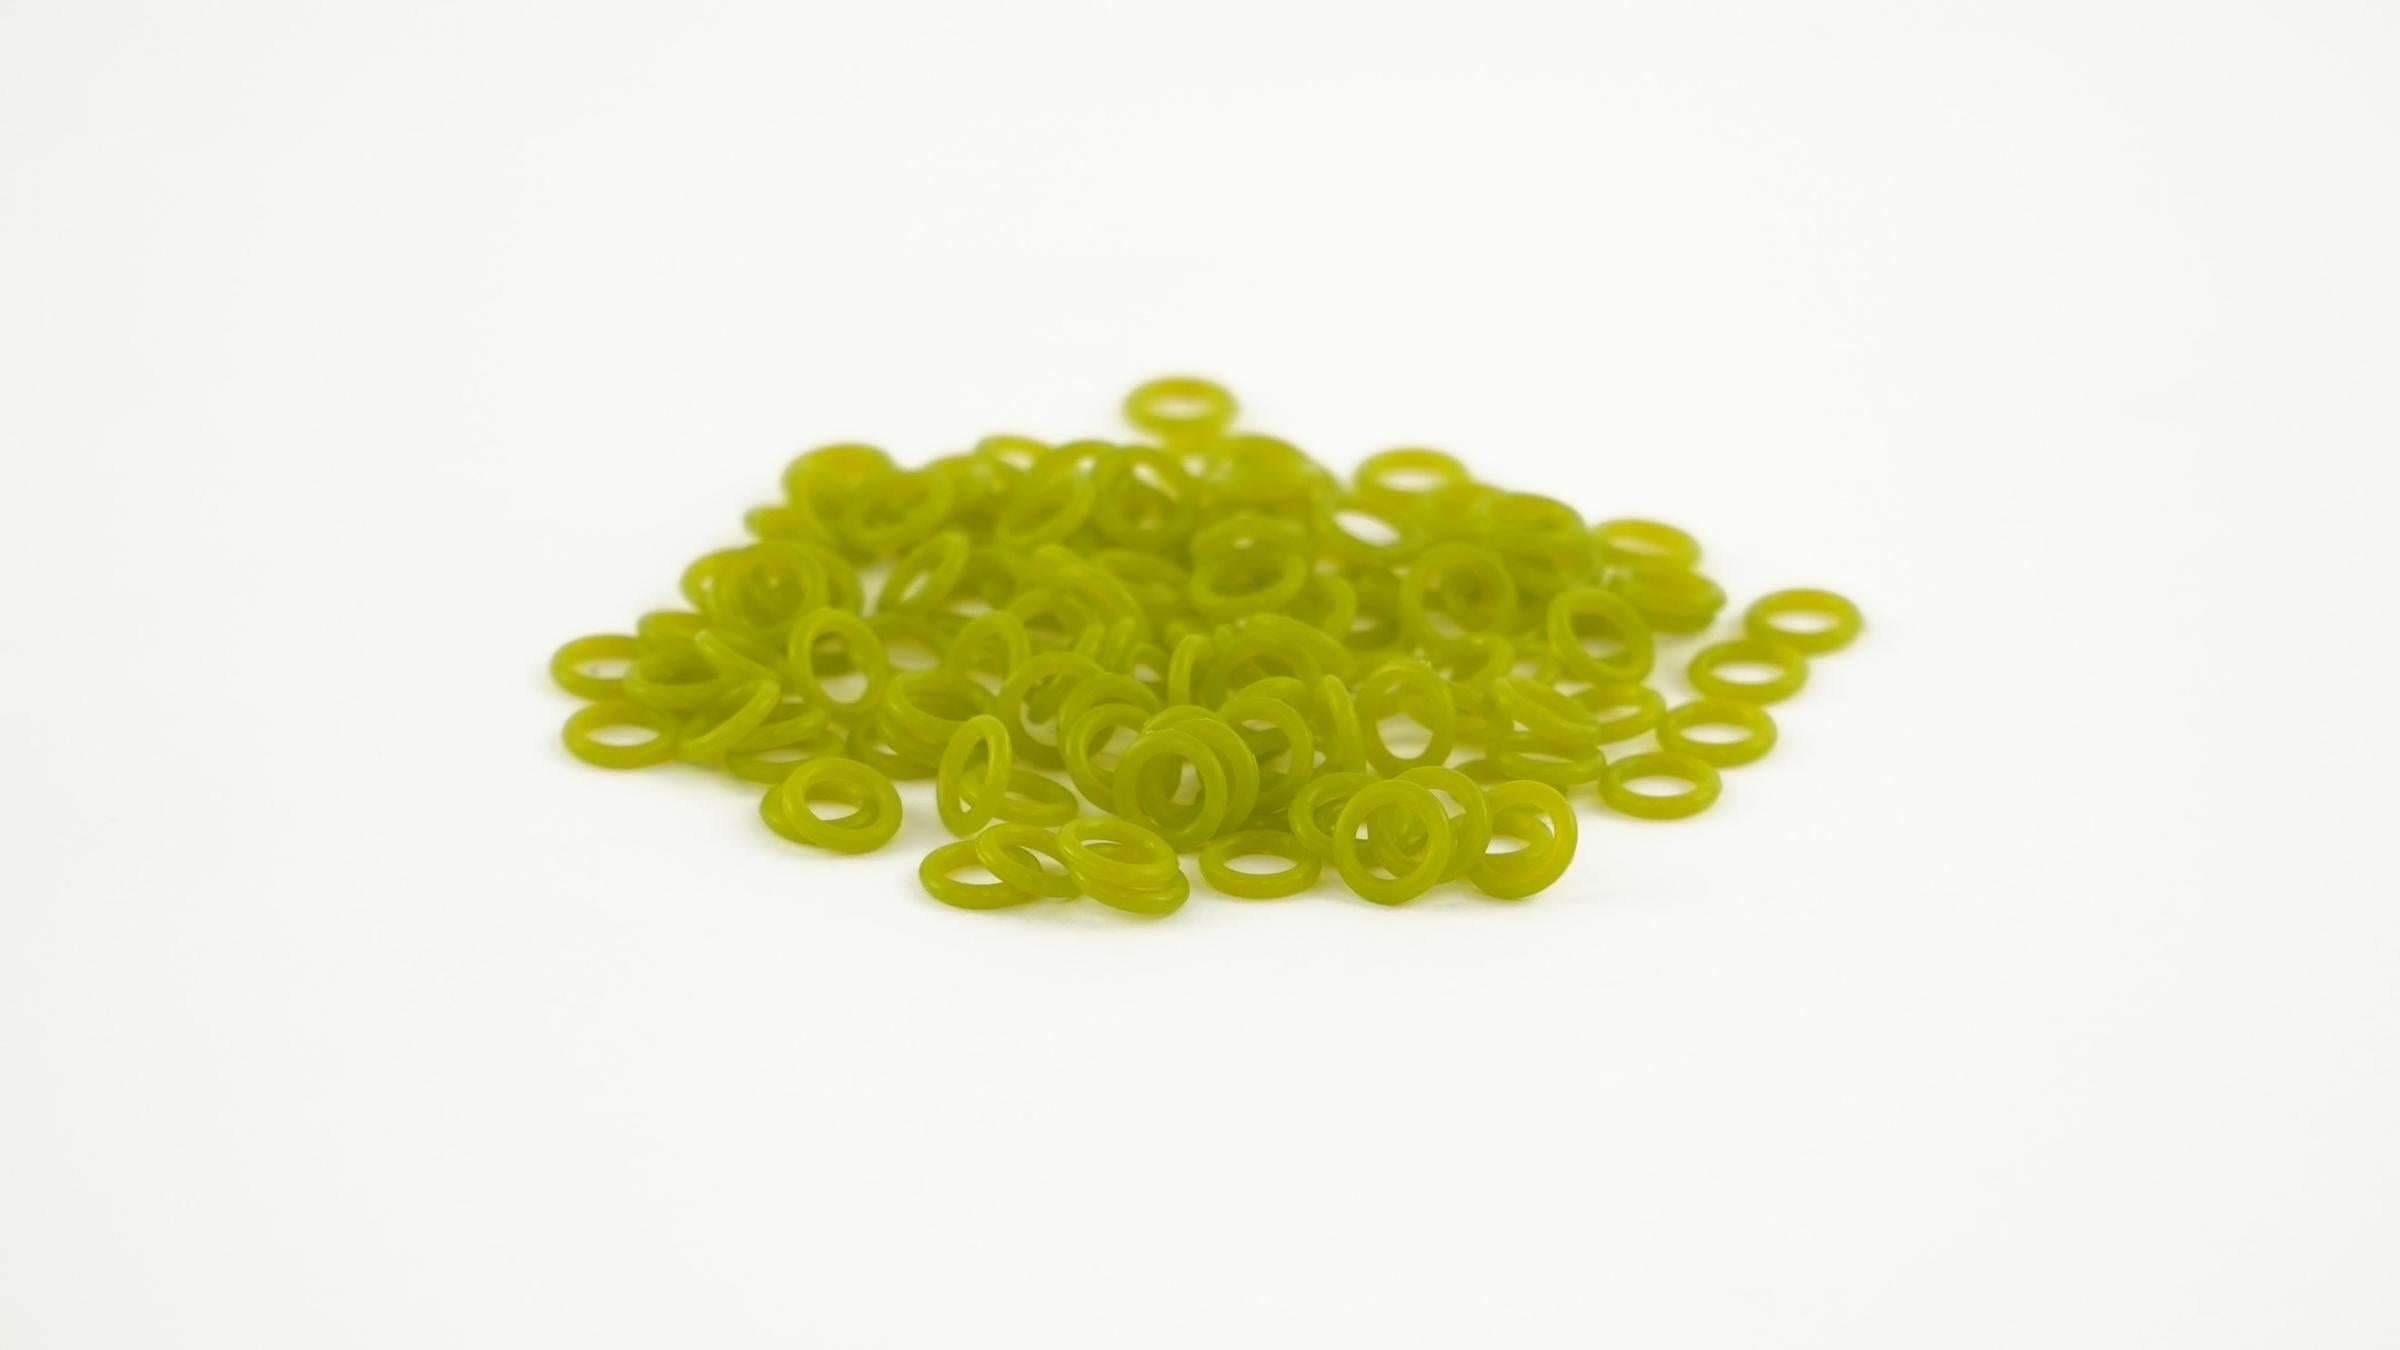 MK Pro Rings Silicone Switch Dampening O-rings 30A 1.5mm (120 Pack) MKPM7HZX0W |0|